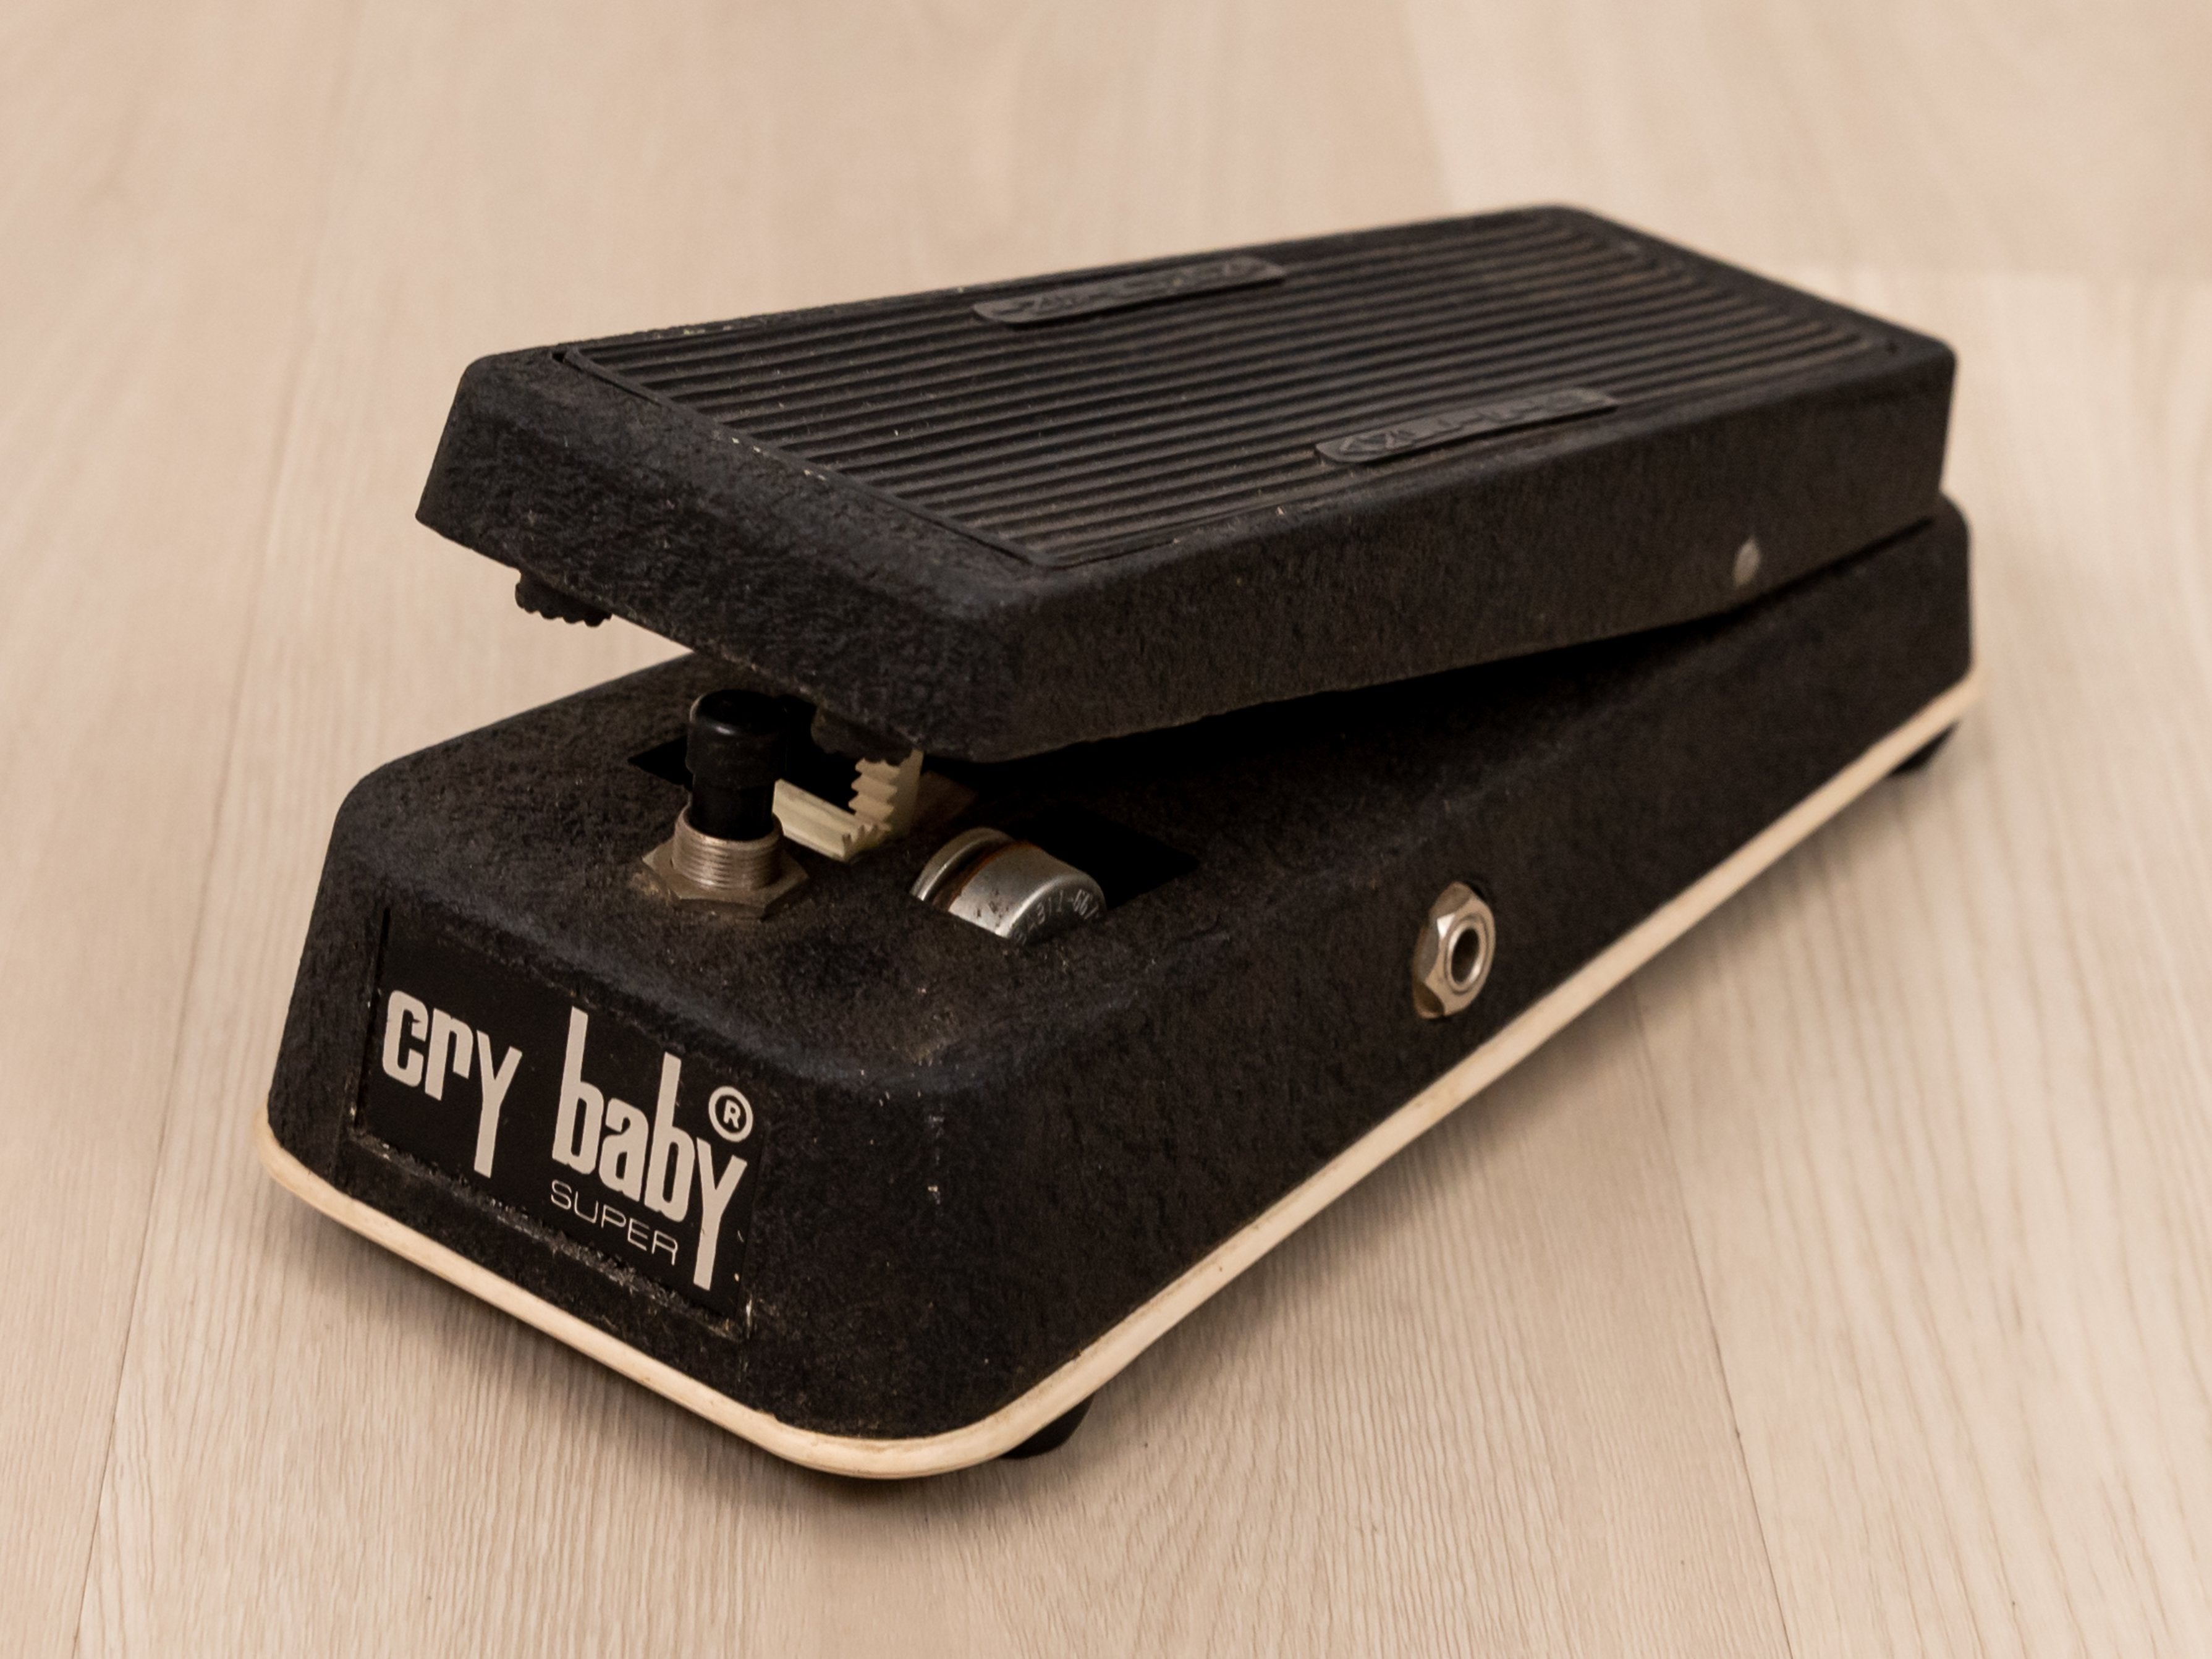 1979 JEN Cry Baby Super Vintage Wah Pedal w/ Case, Italy w/ Fasel Inductor